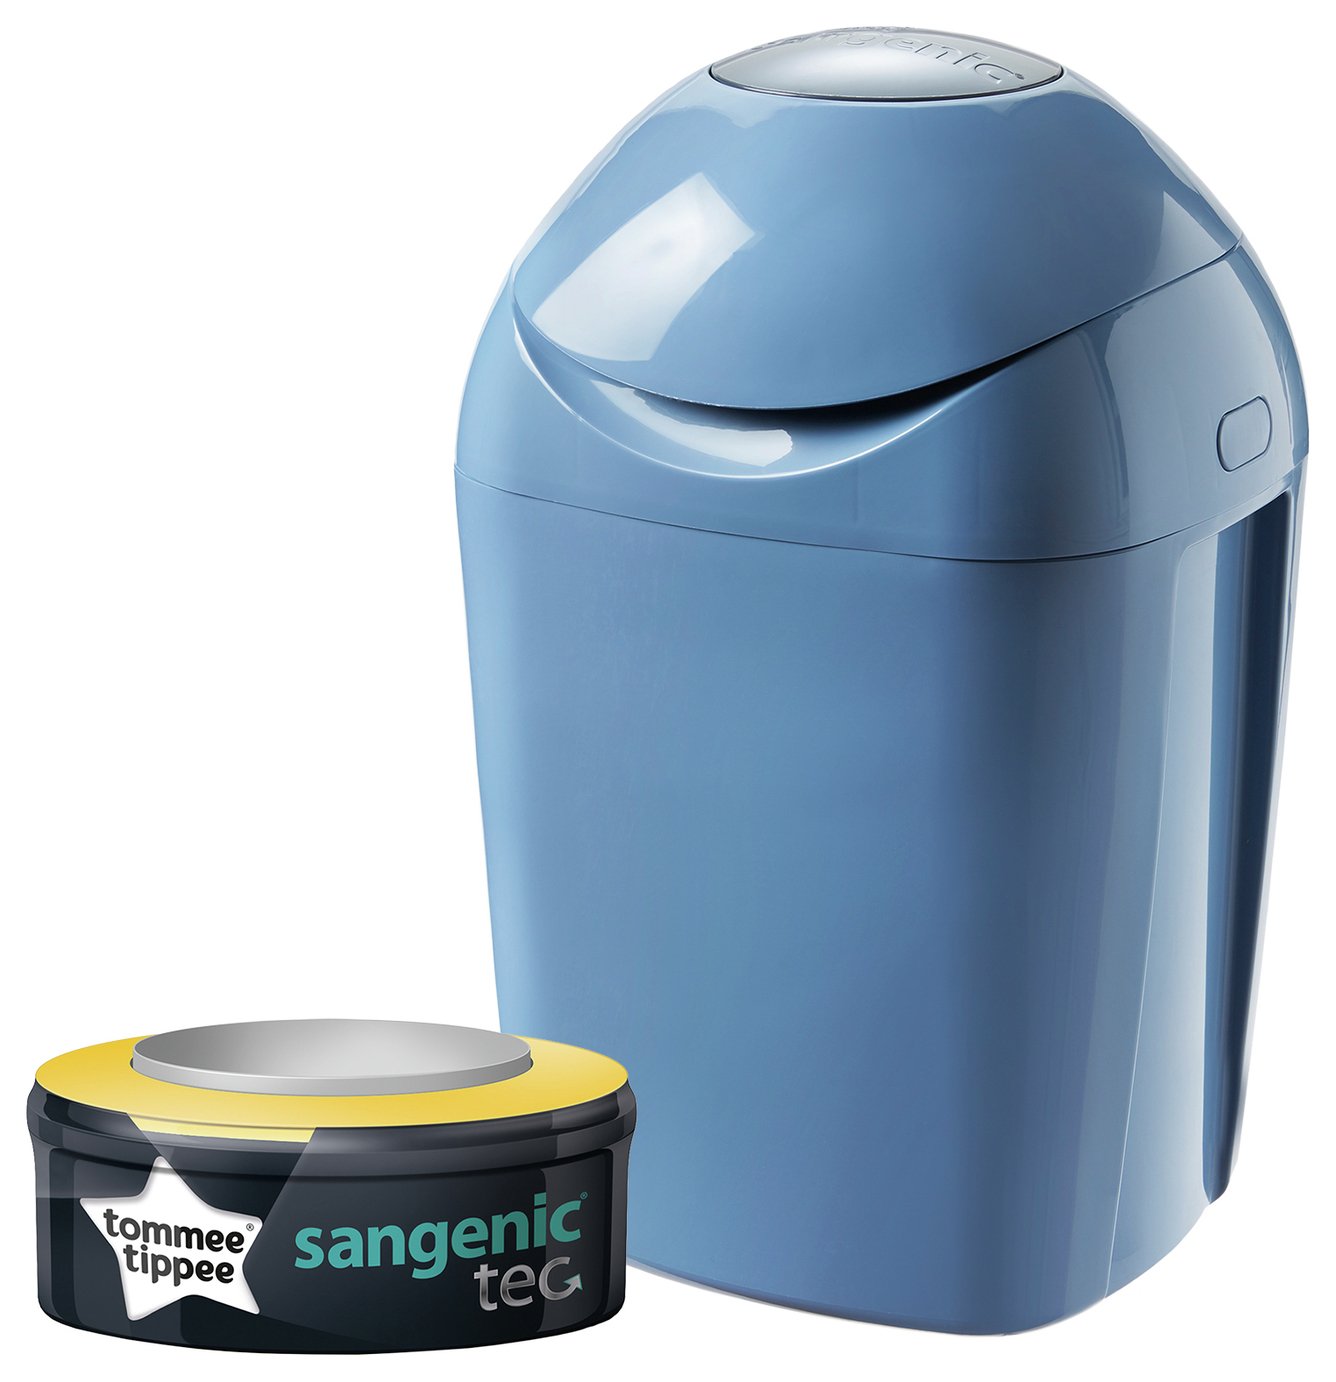 Tommee Tippee Sangenic Tec Nappy Disposal Tub - Green